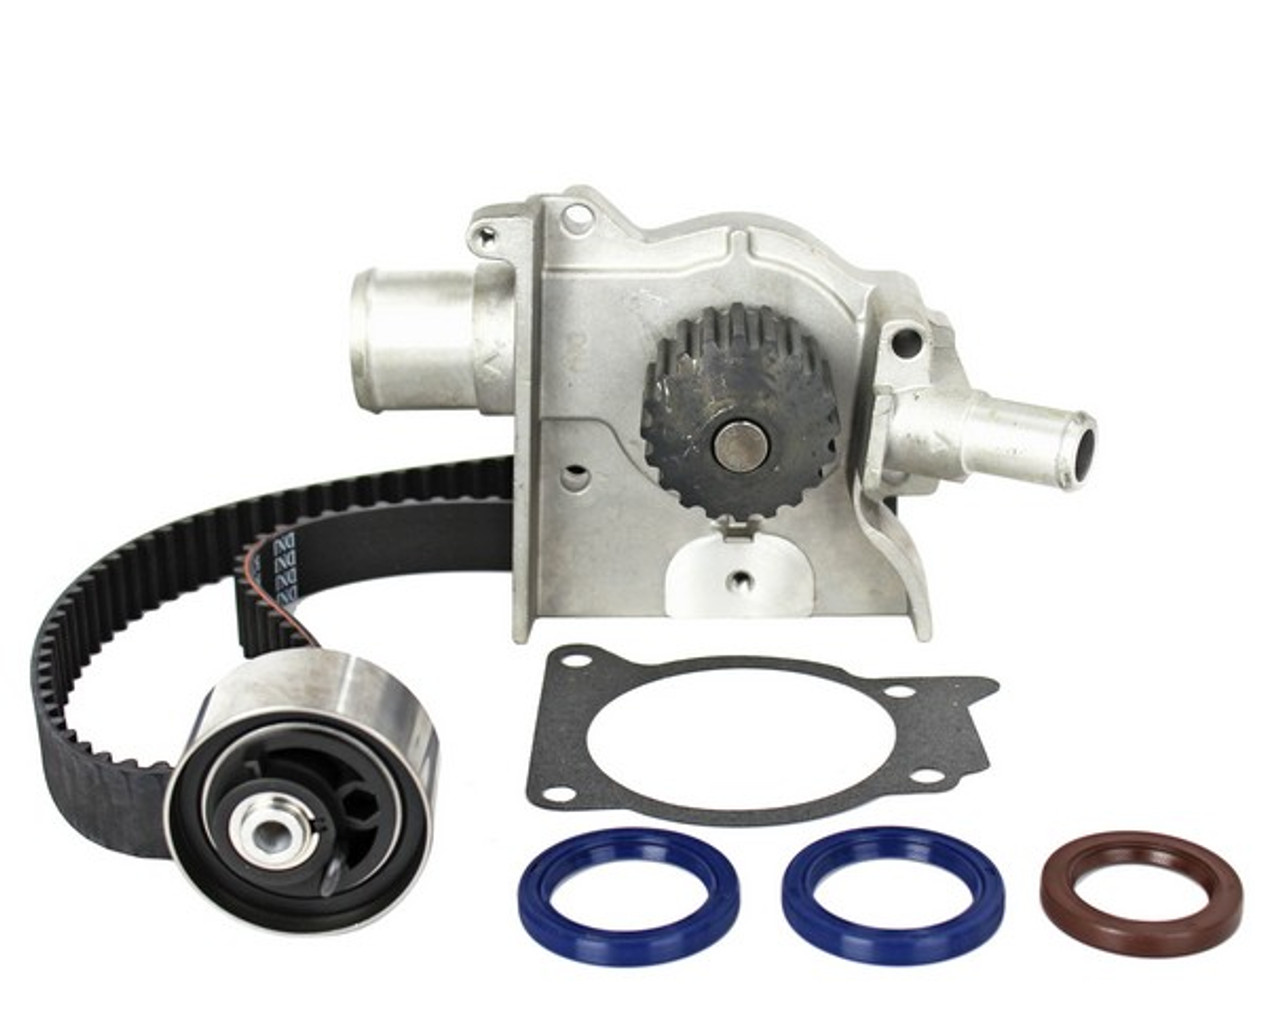 1999 Mercury Tracer 2.0L Timing Belt Kit with Water Pump TBK420AWP.E9